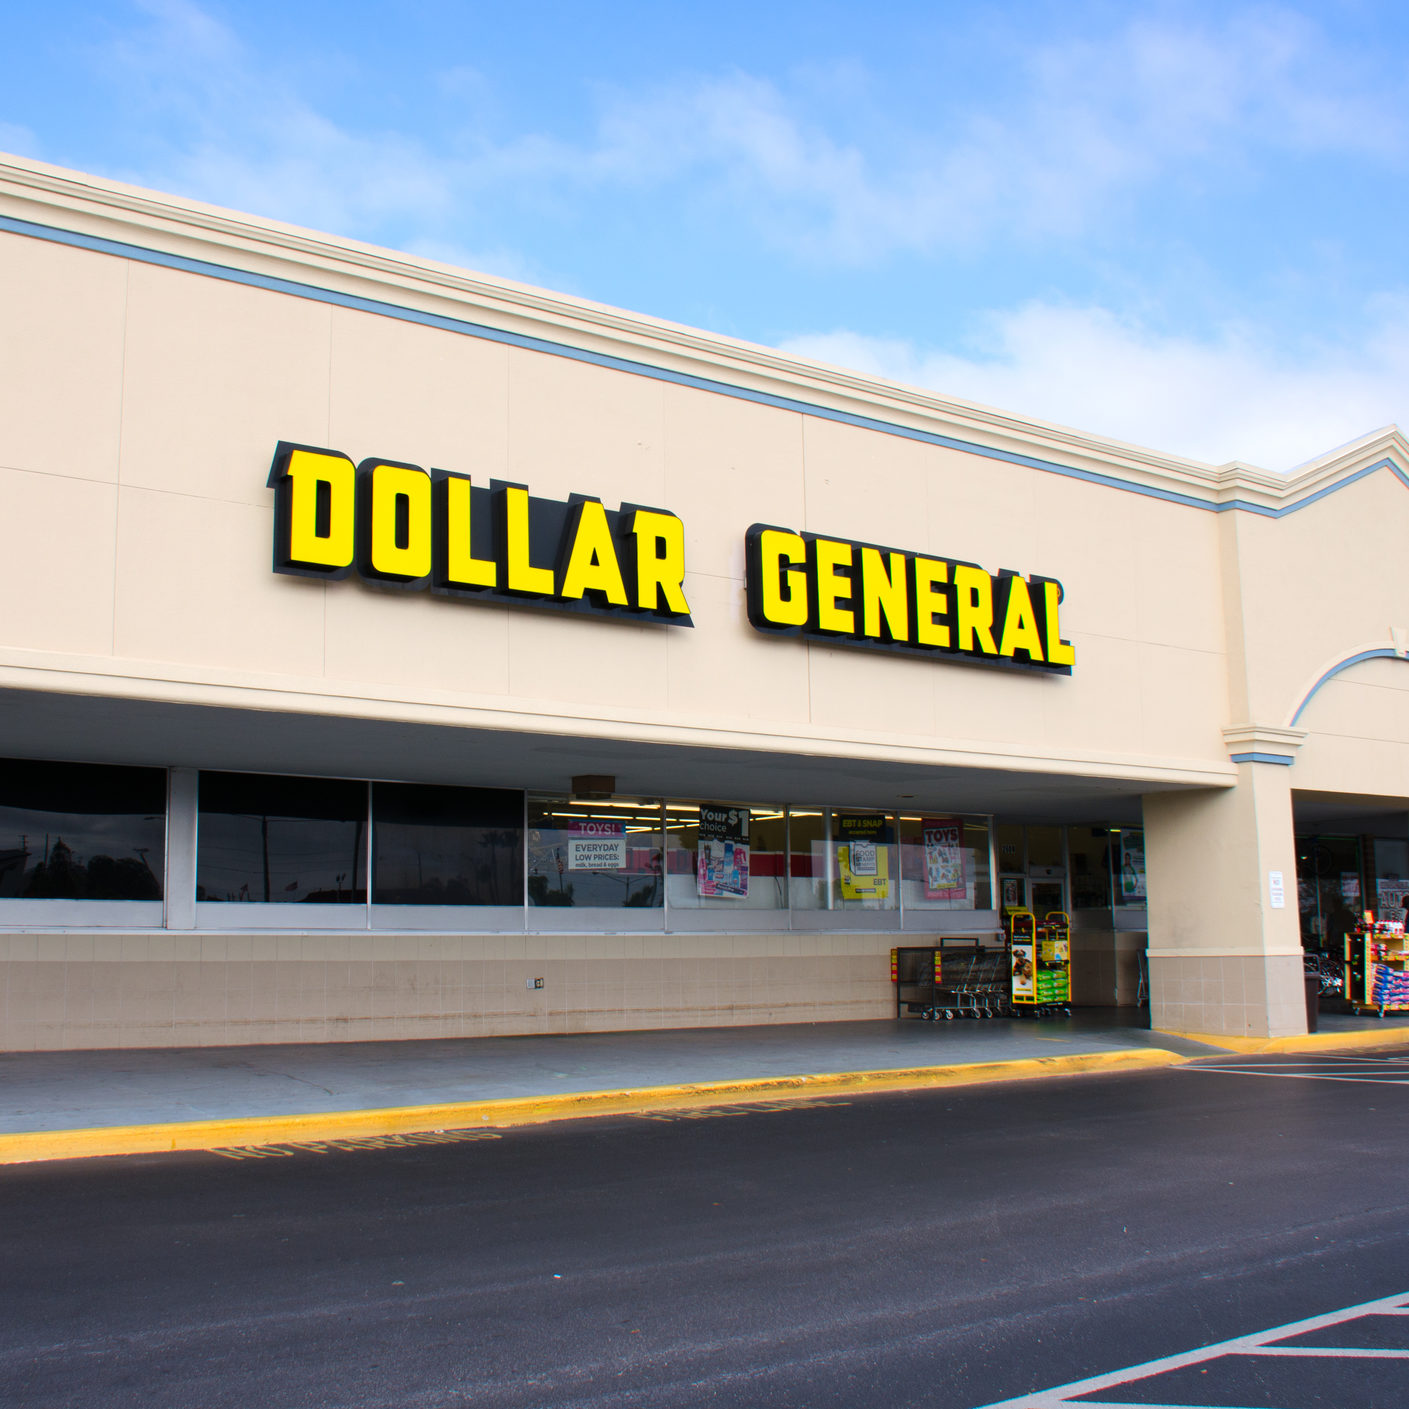 Today only: Save $5 off your purchase of $25 at Dollar General